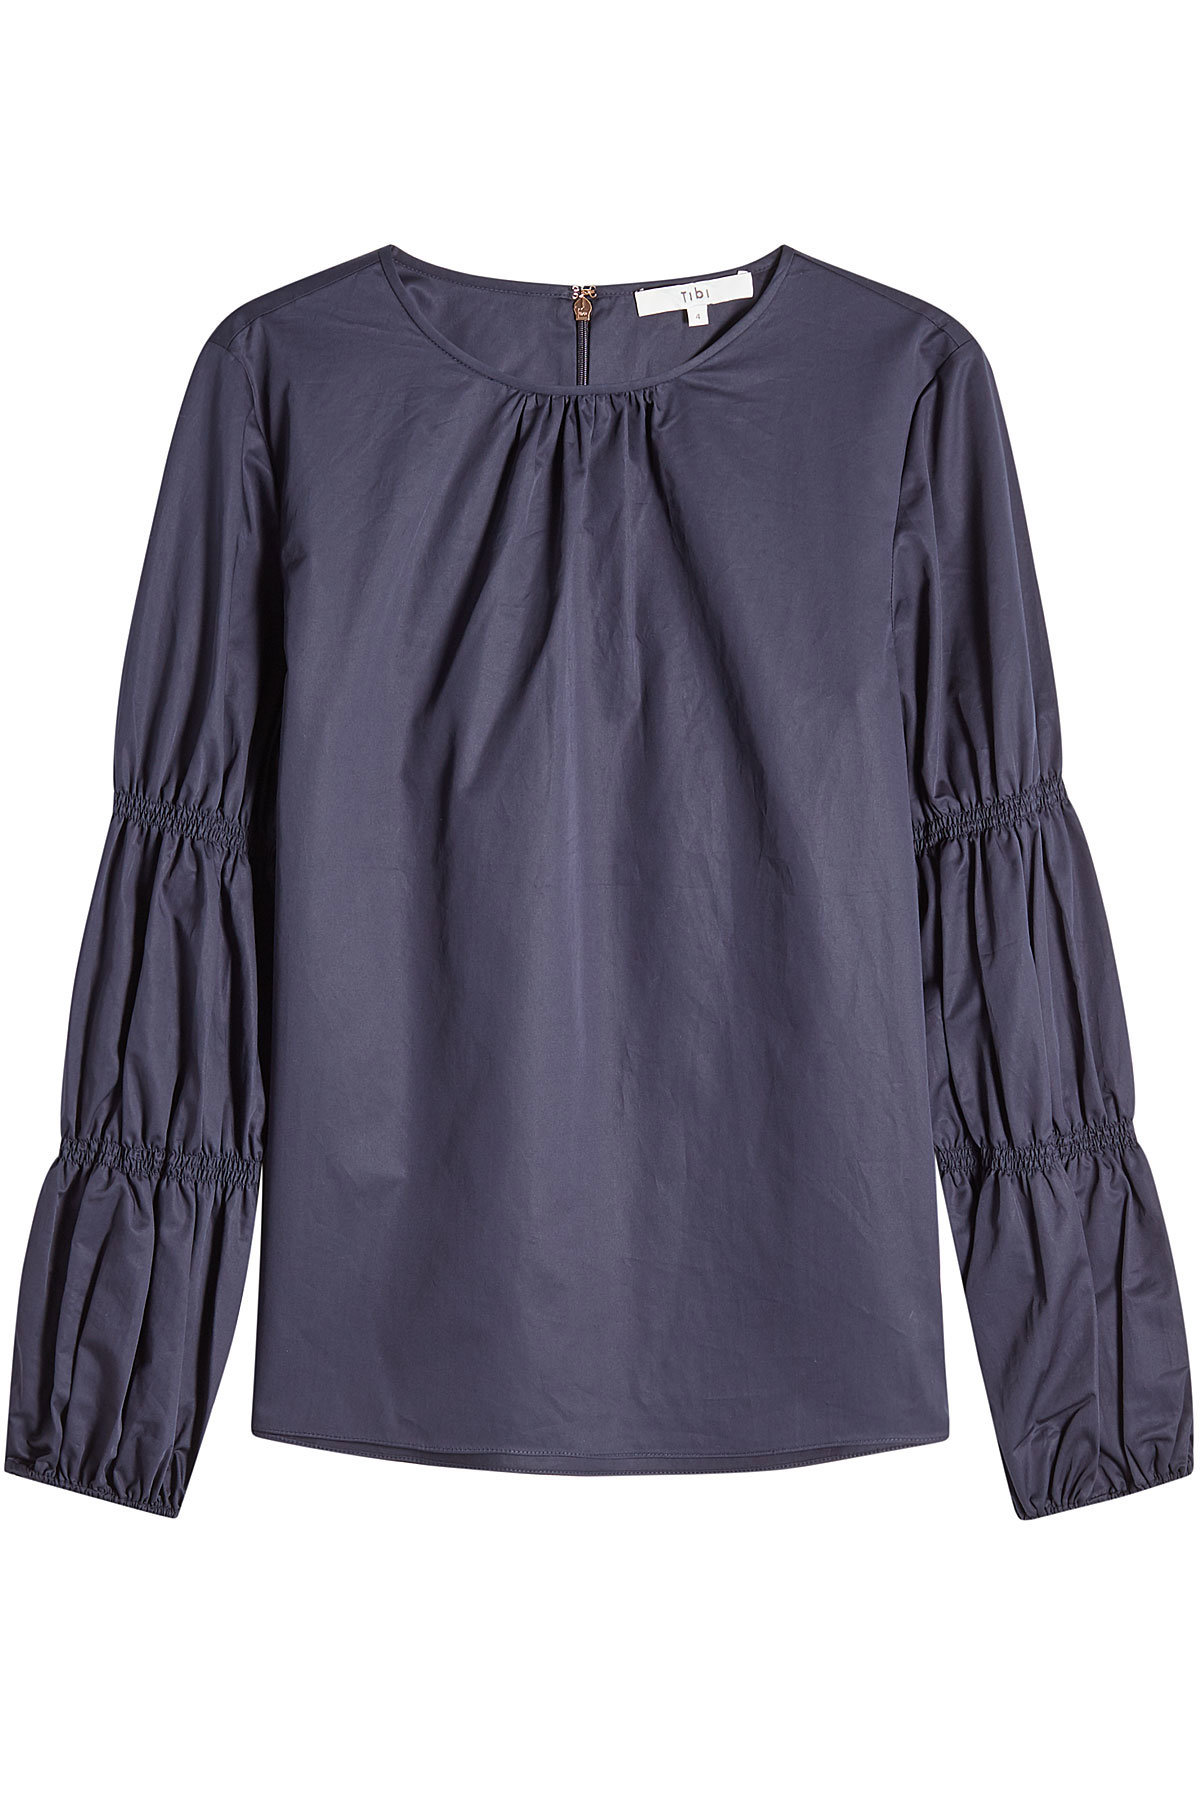 Tibi - Cotton Blouse with Gathered Sleeves